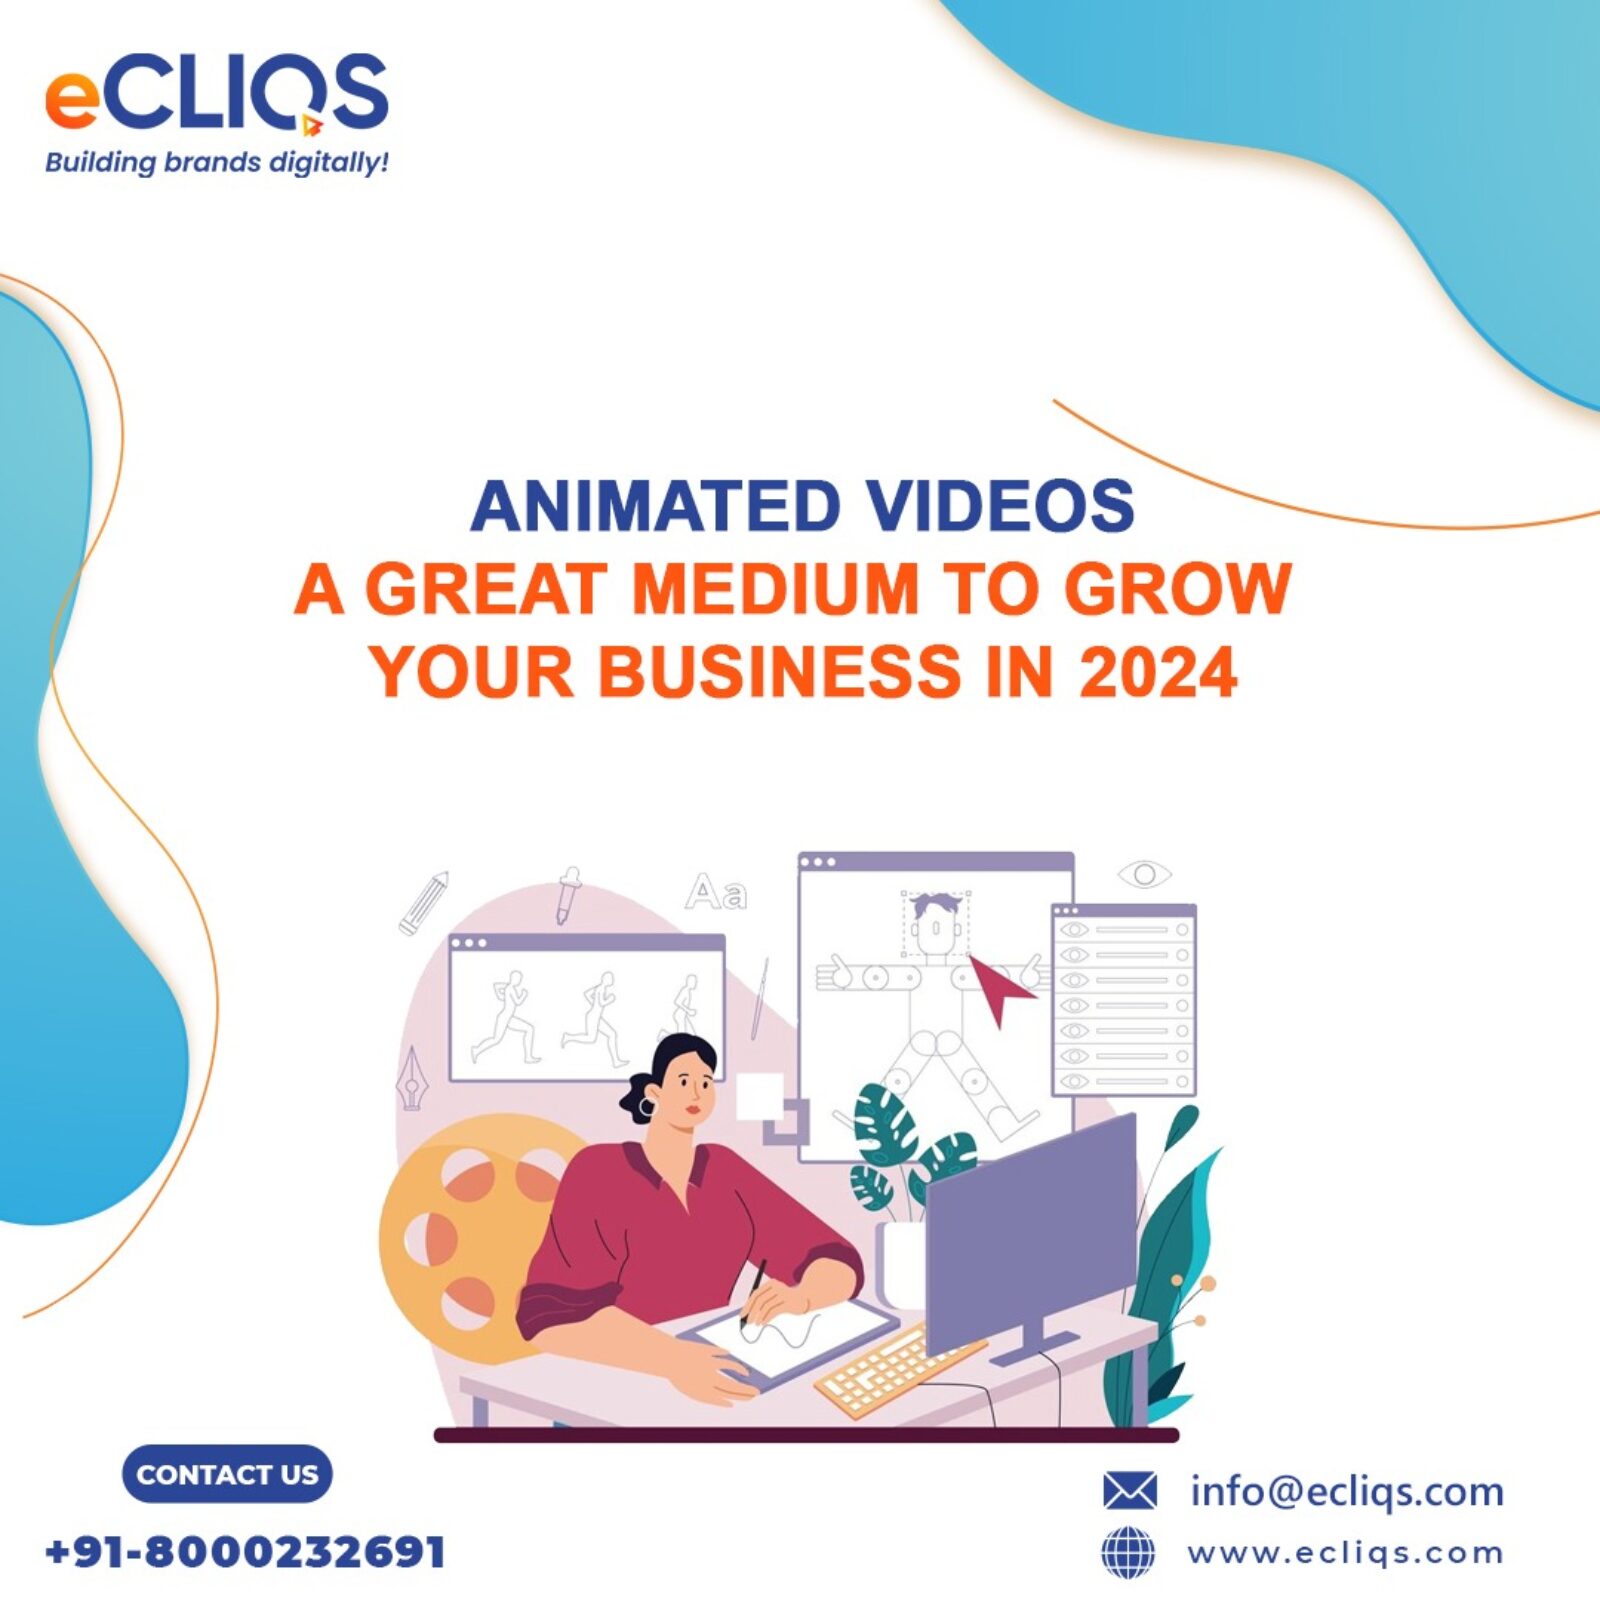 Animated Videos – A great medium to grow your business in 2024